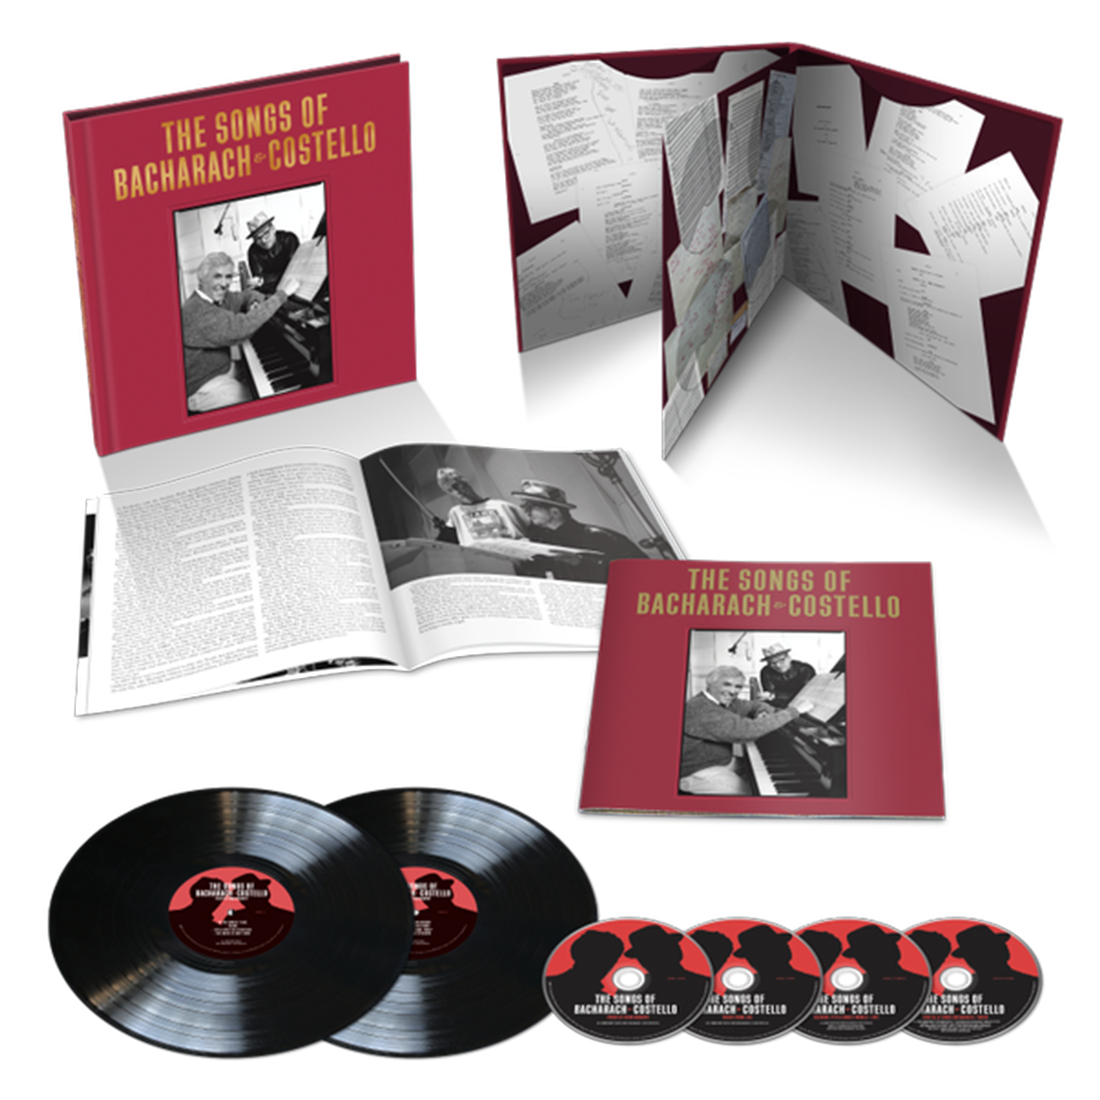 Elvis Costello - The Songs of Bacharach & Costello: Super Deluxe Edition 2LP + 4CD Box Set